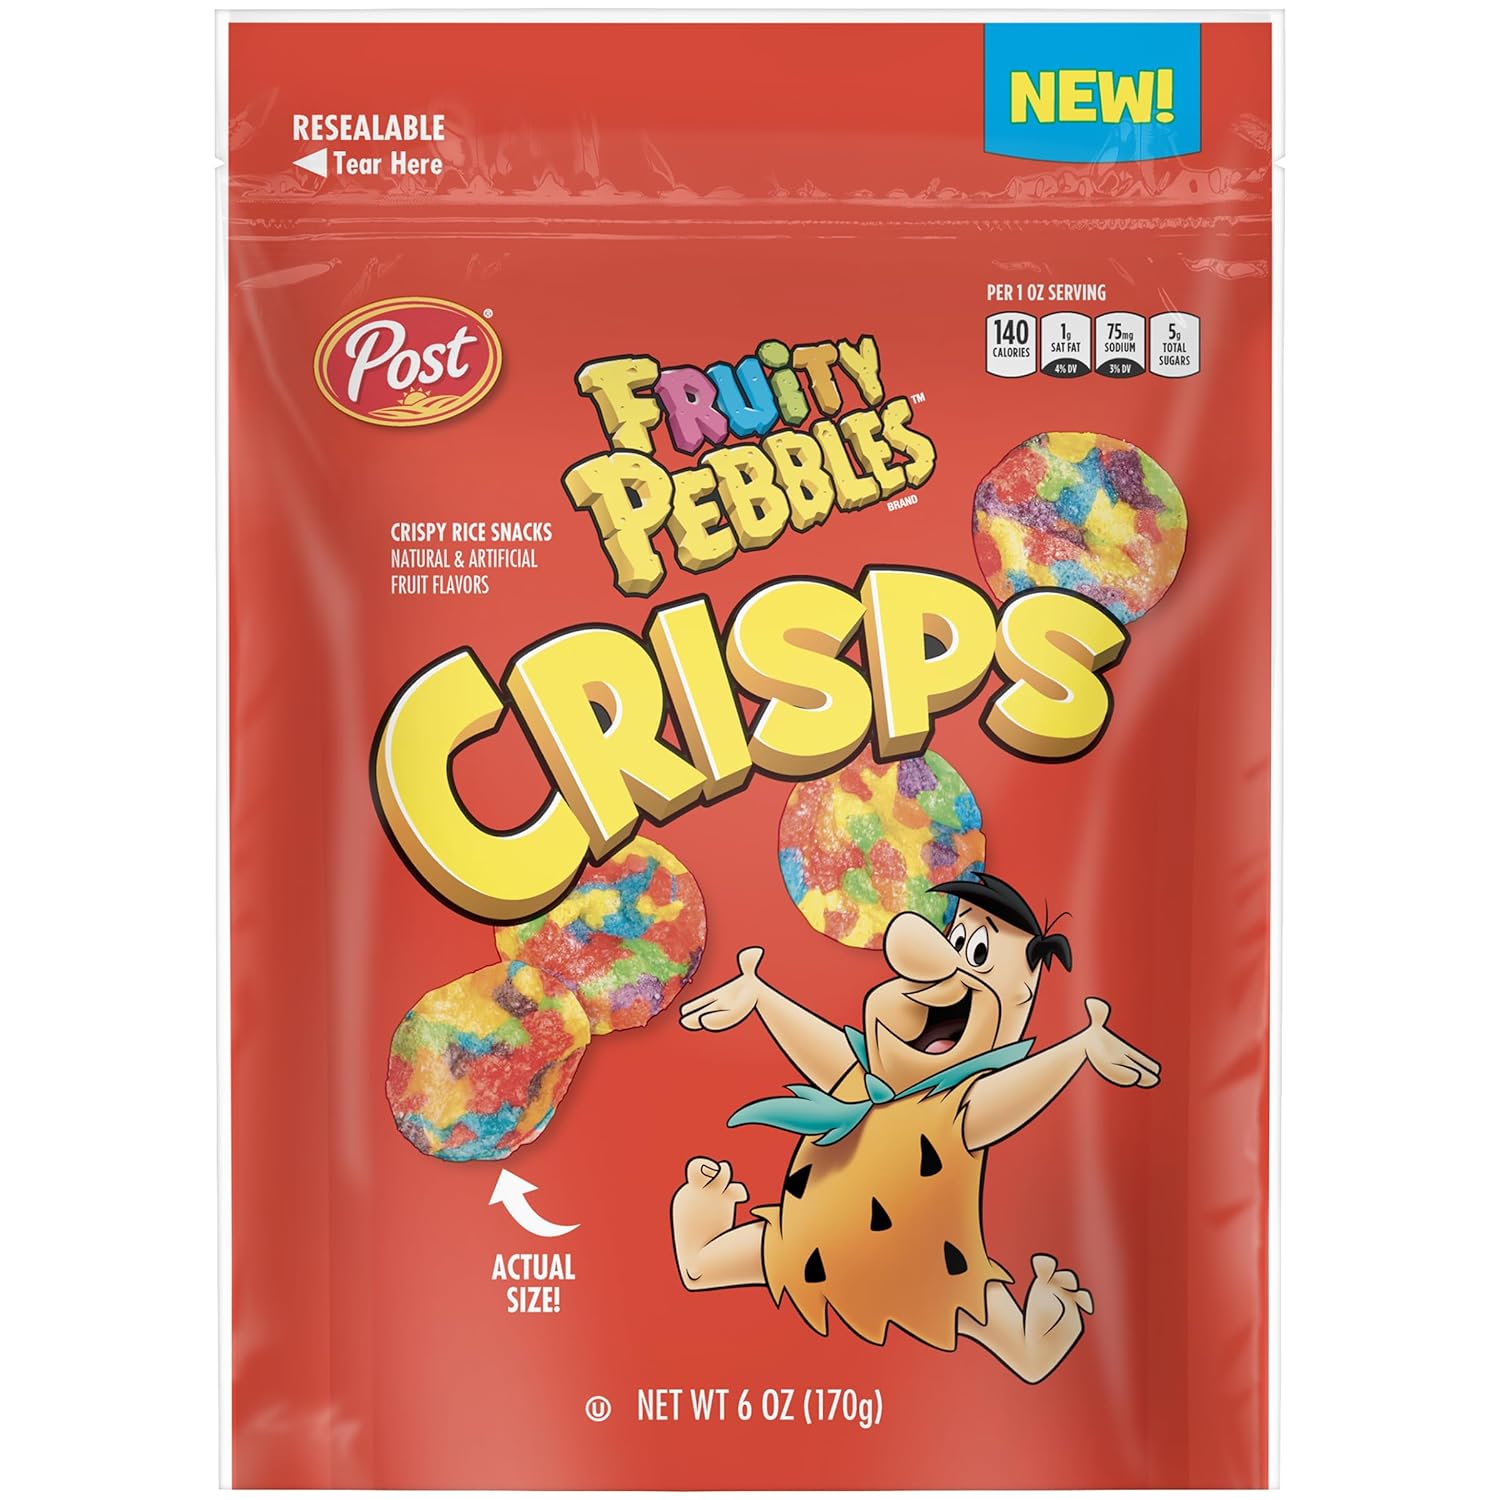 New Post Fruity Pebbles Crisps, Portable Cereal Snack for Kids and Families, Gluten Free, 6 Ounce – 3 count